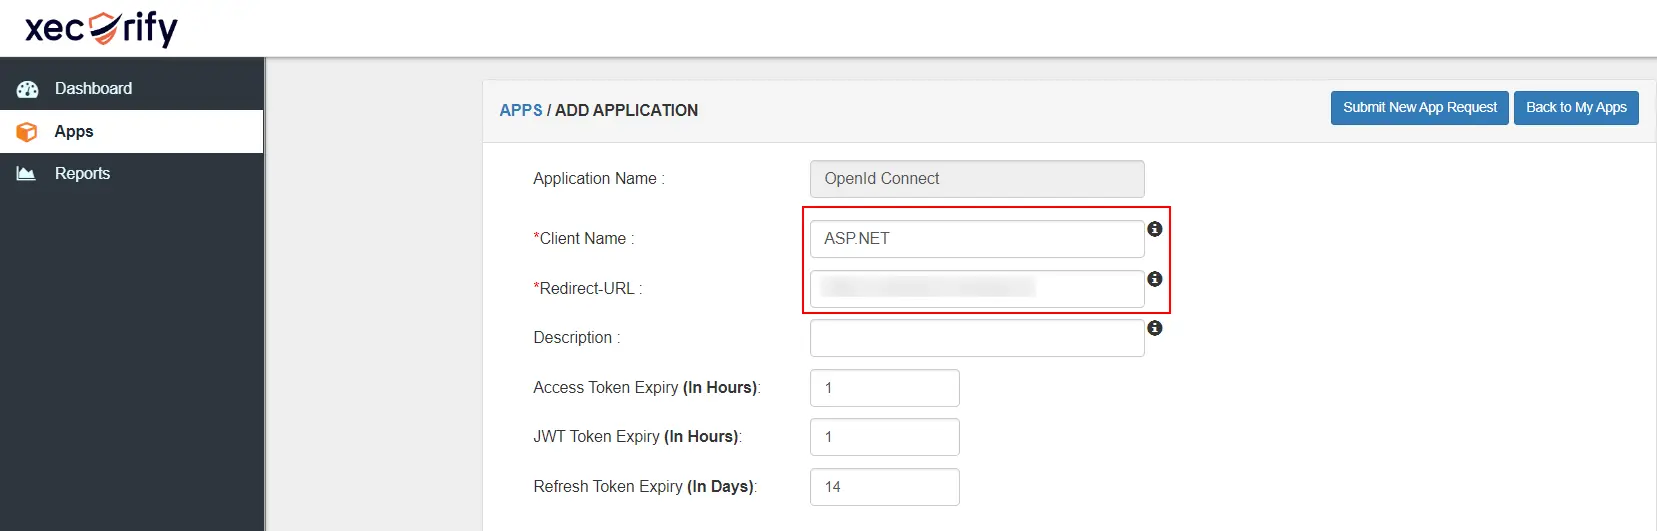 ASP.NET OAuth Single Sign-On (SSO) using Shopify as IDP - Enter Redirect URL and Client Name